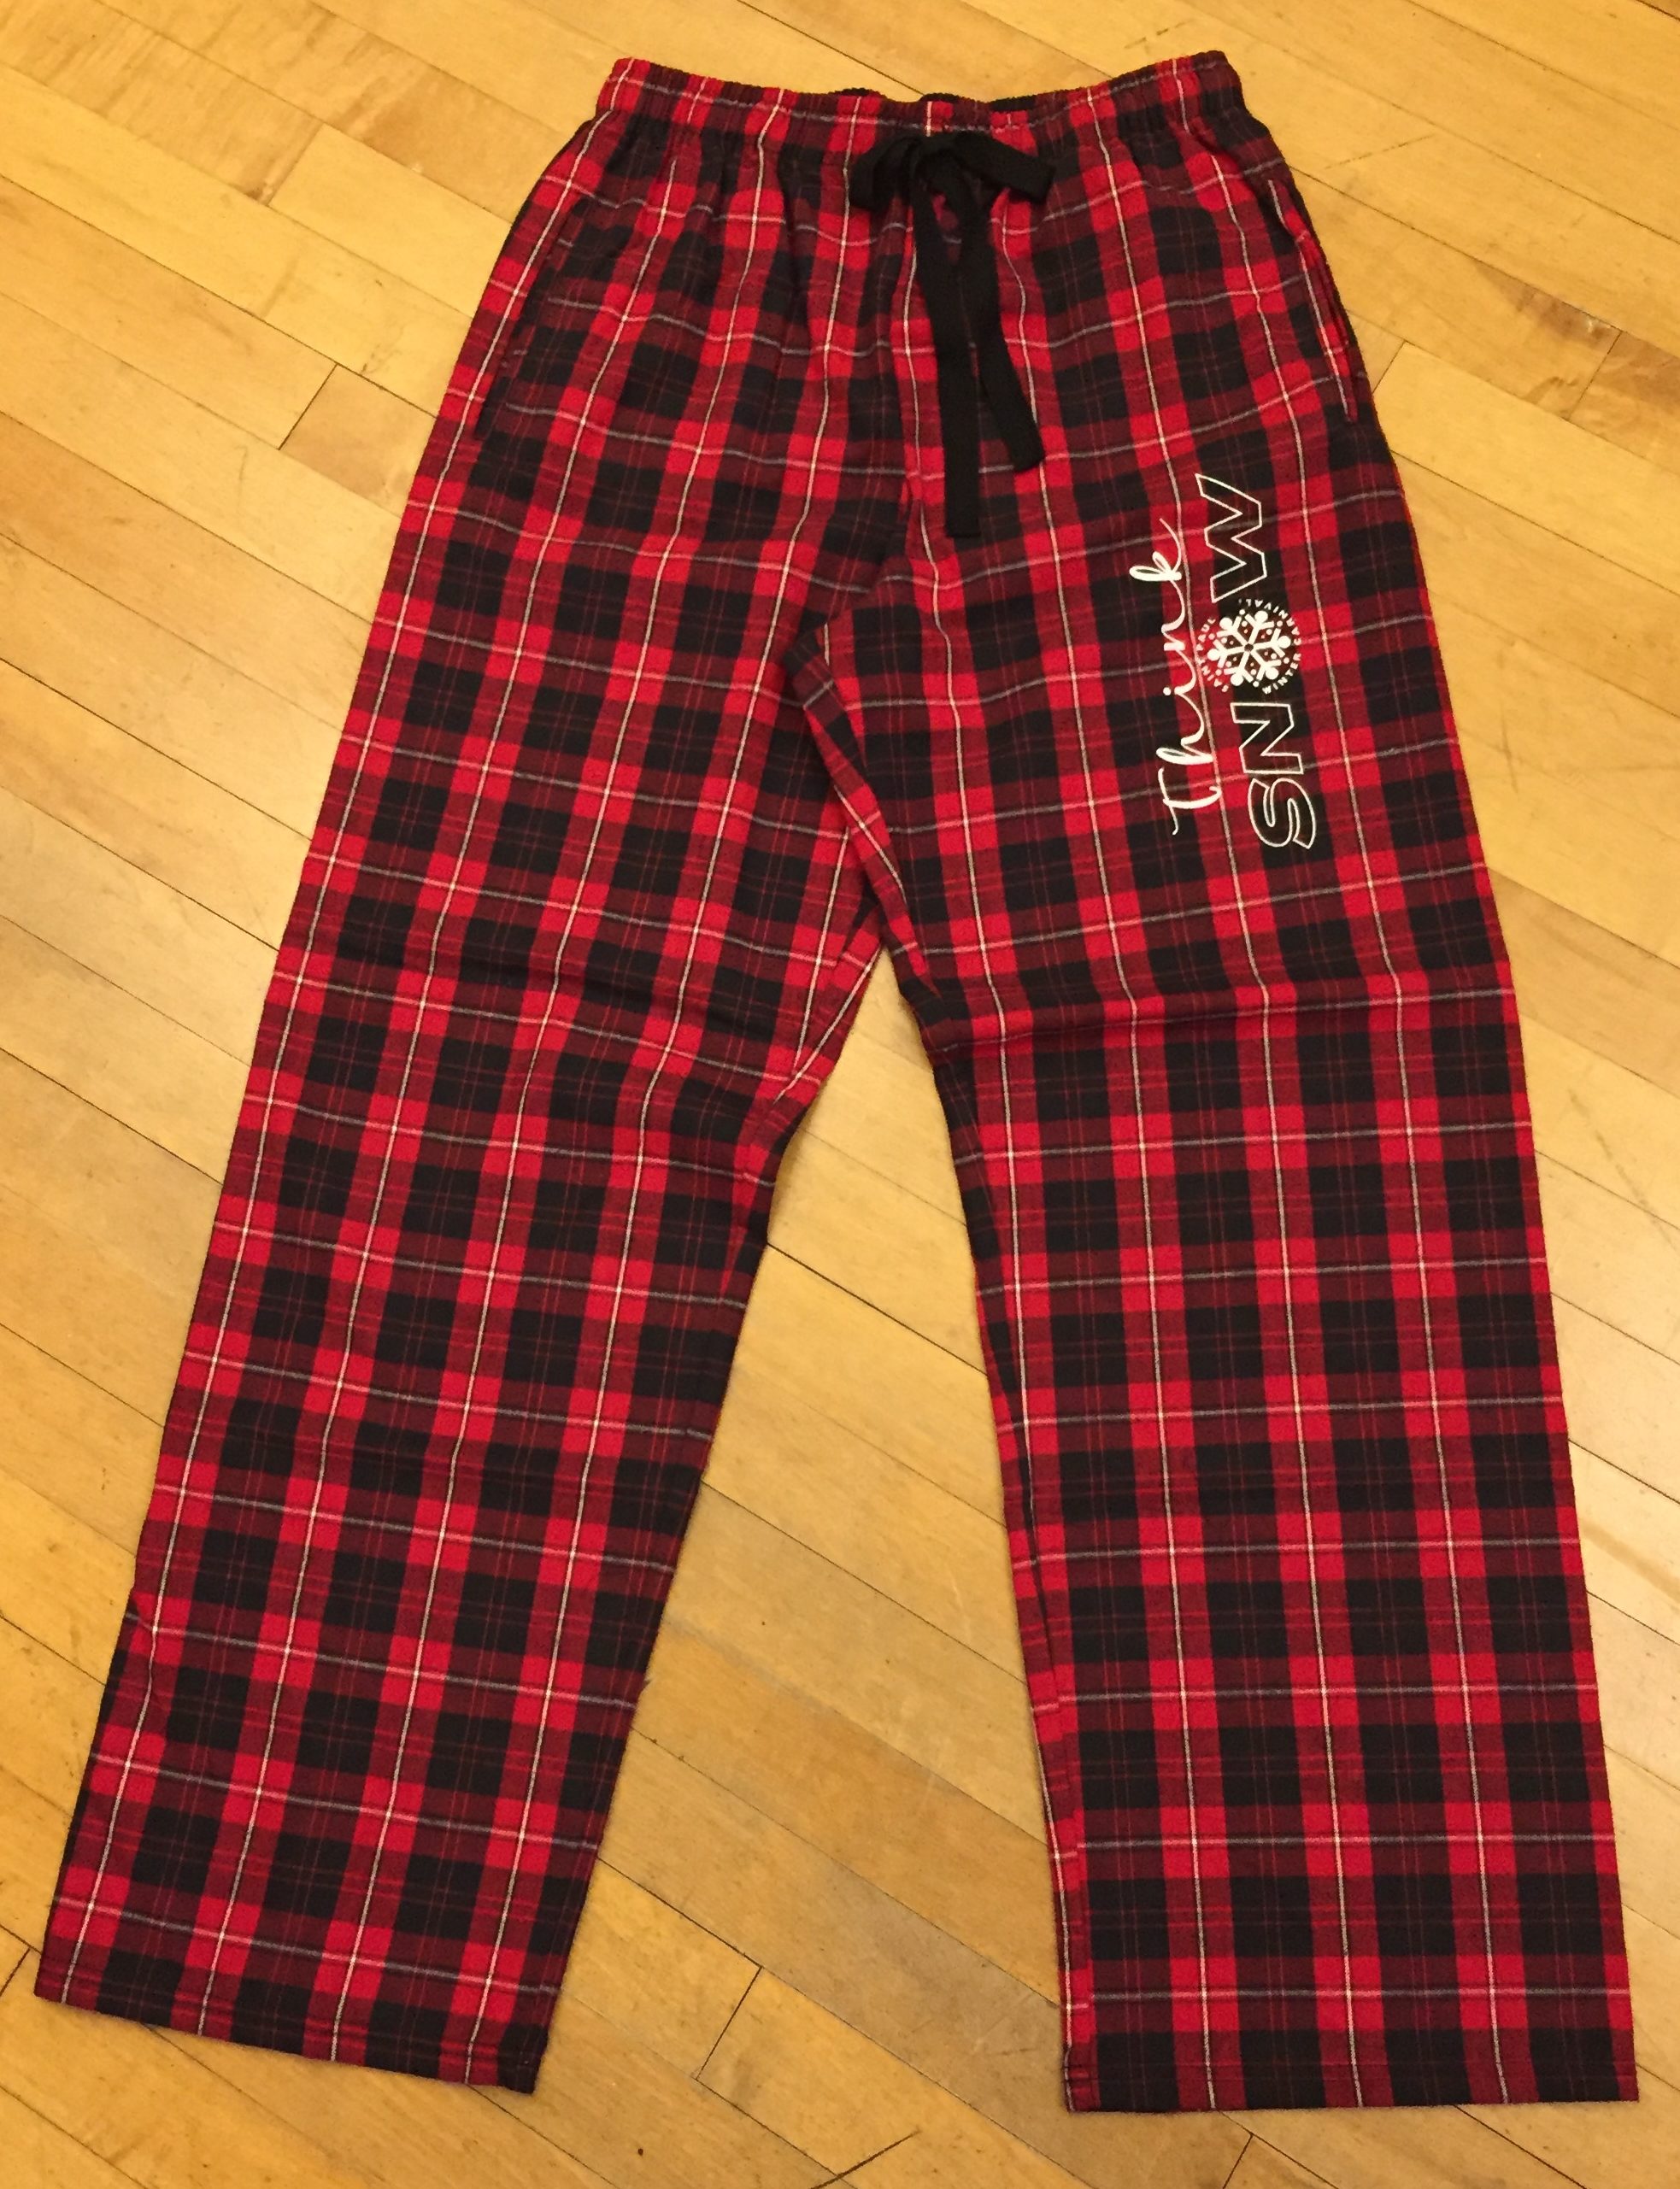 checkered pants red and black